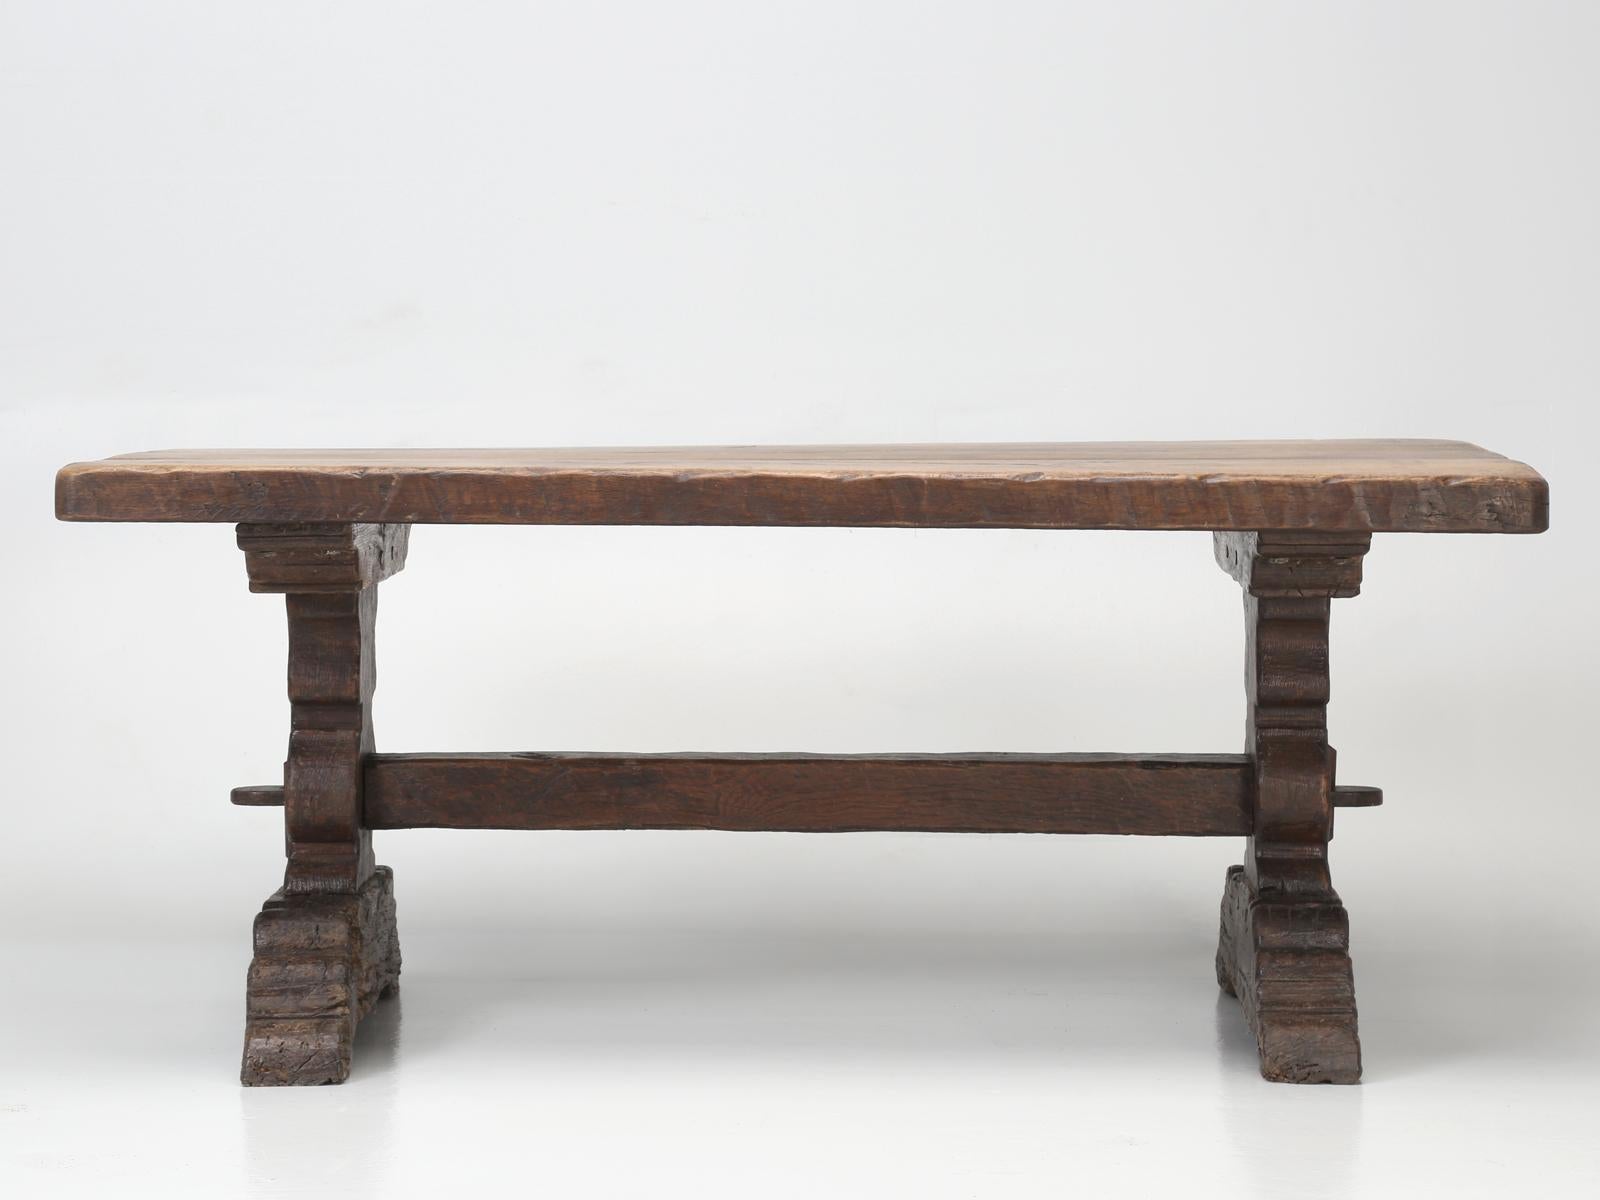 Original Antique French Farm or Trestle Table, circa 200 Years Old, Unrestored 1